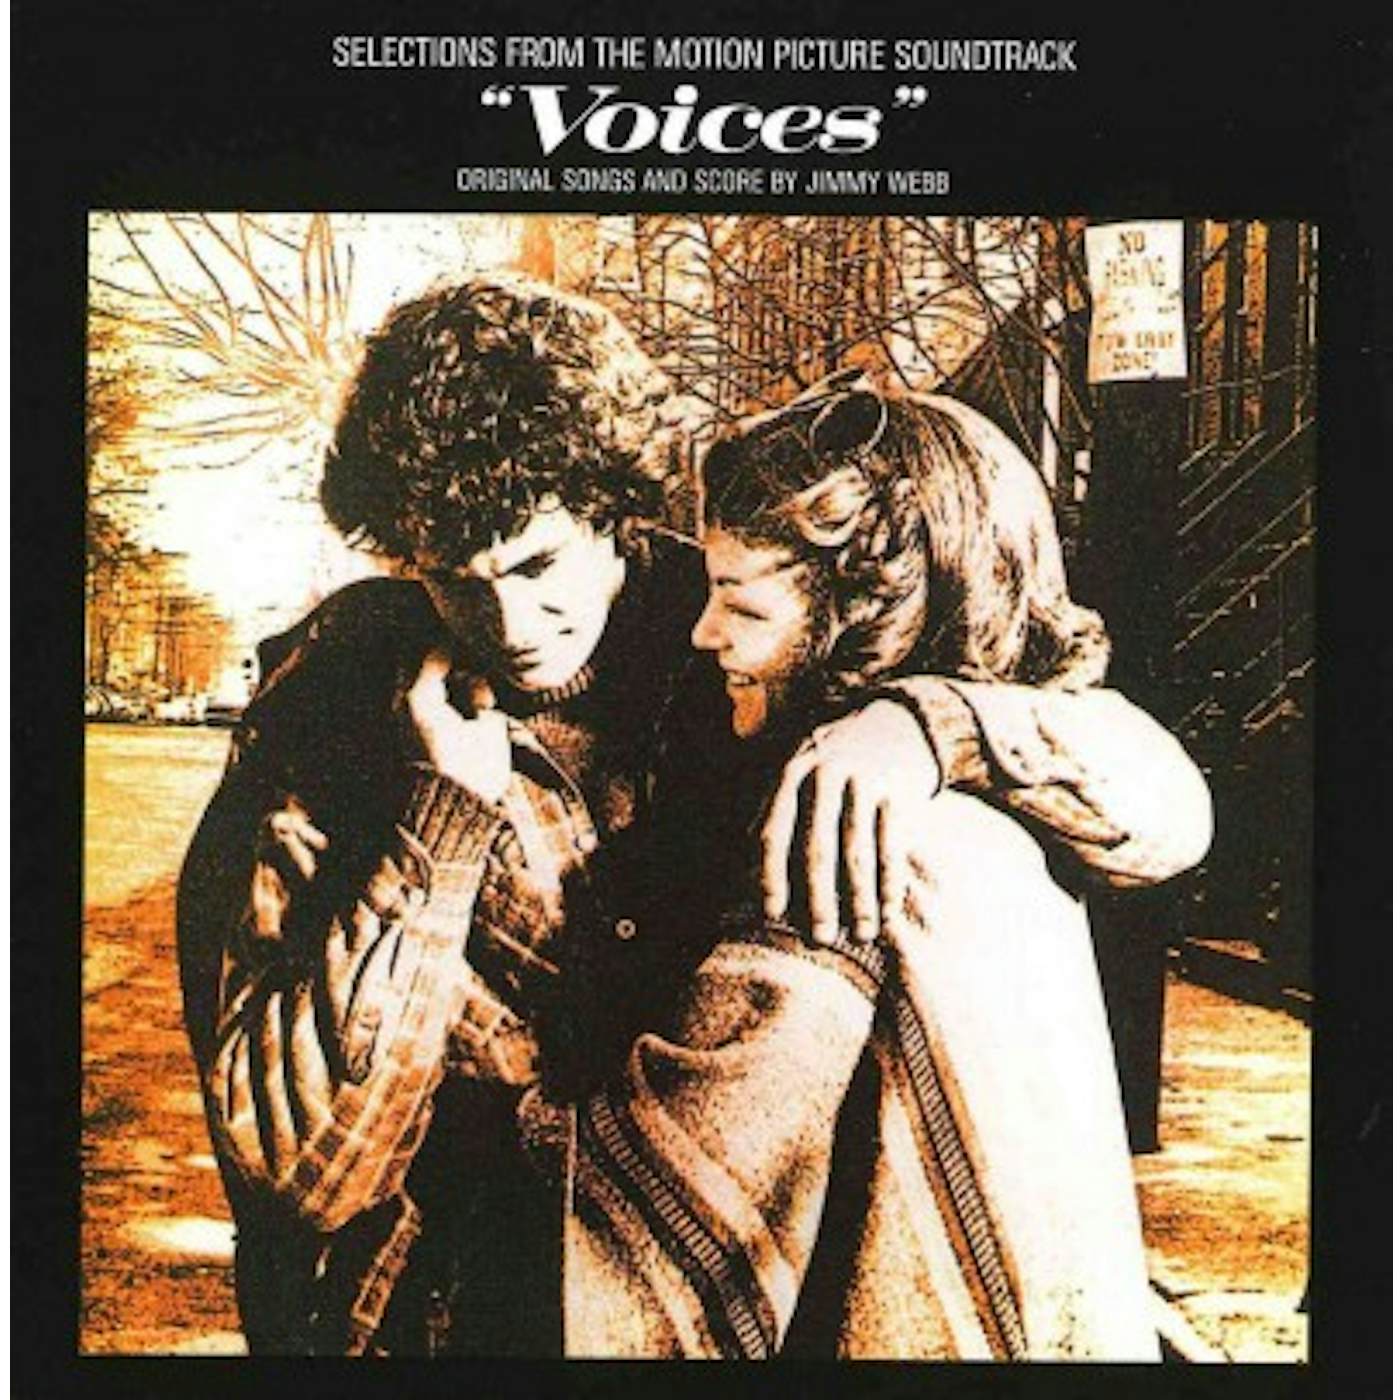 Jimmy Webb Voices - Selections From The Motion Picture Soundtrack CD